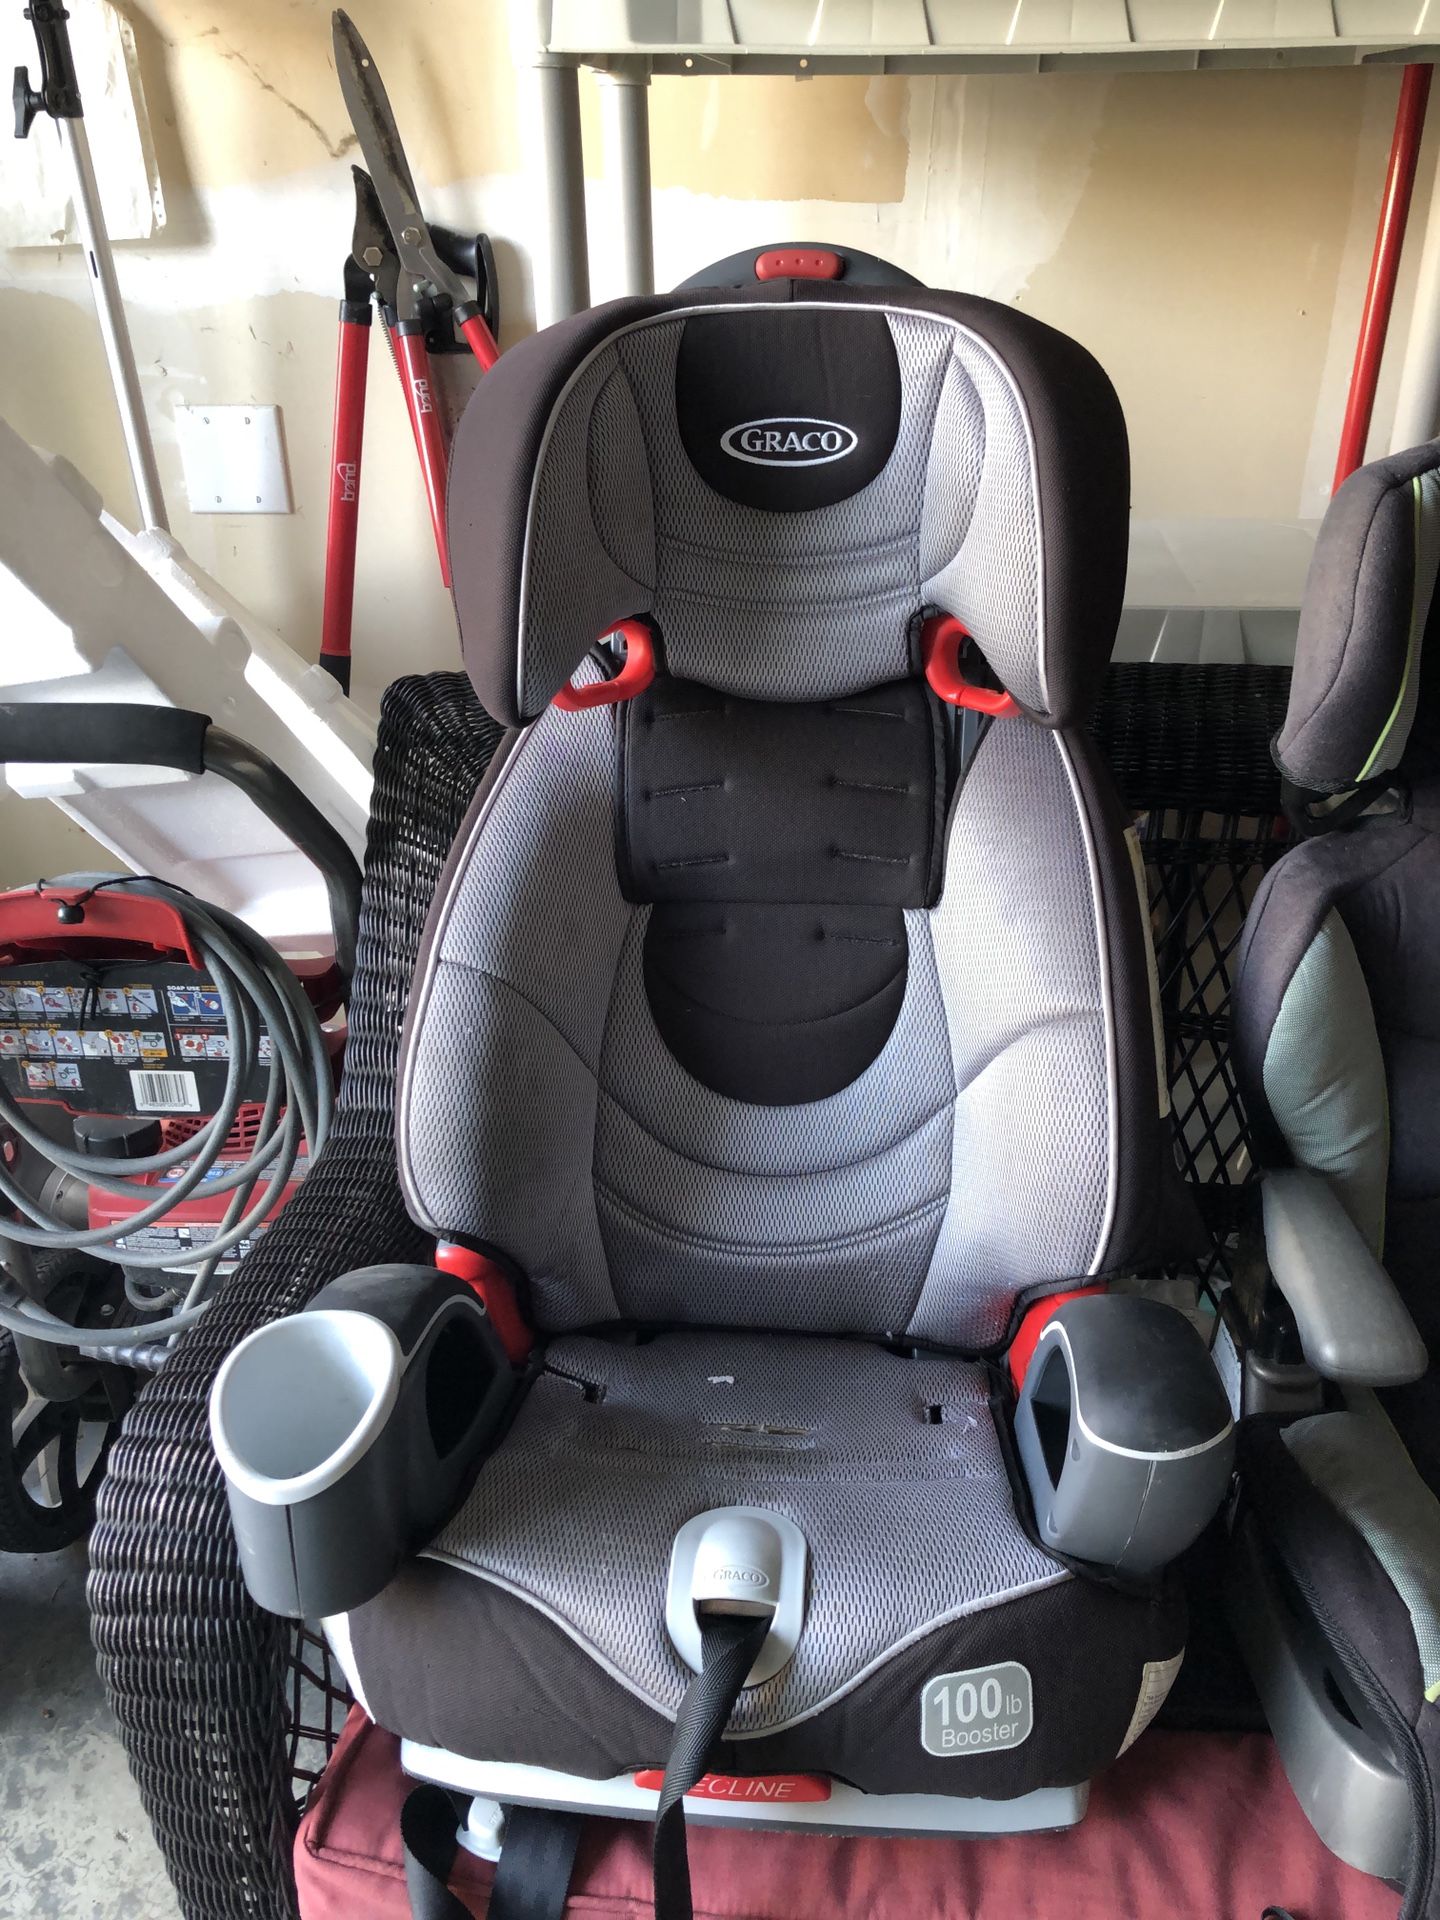 Graco car seat / boosters seat.